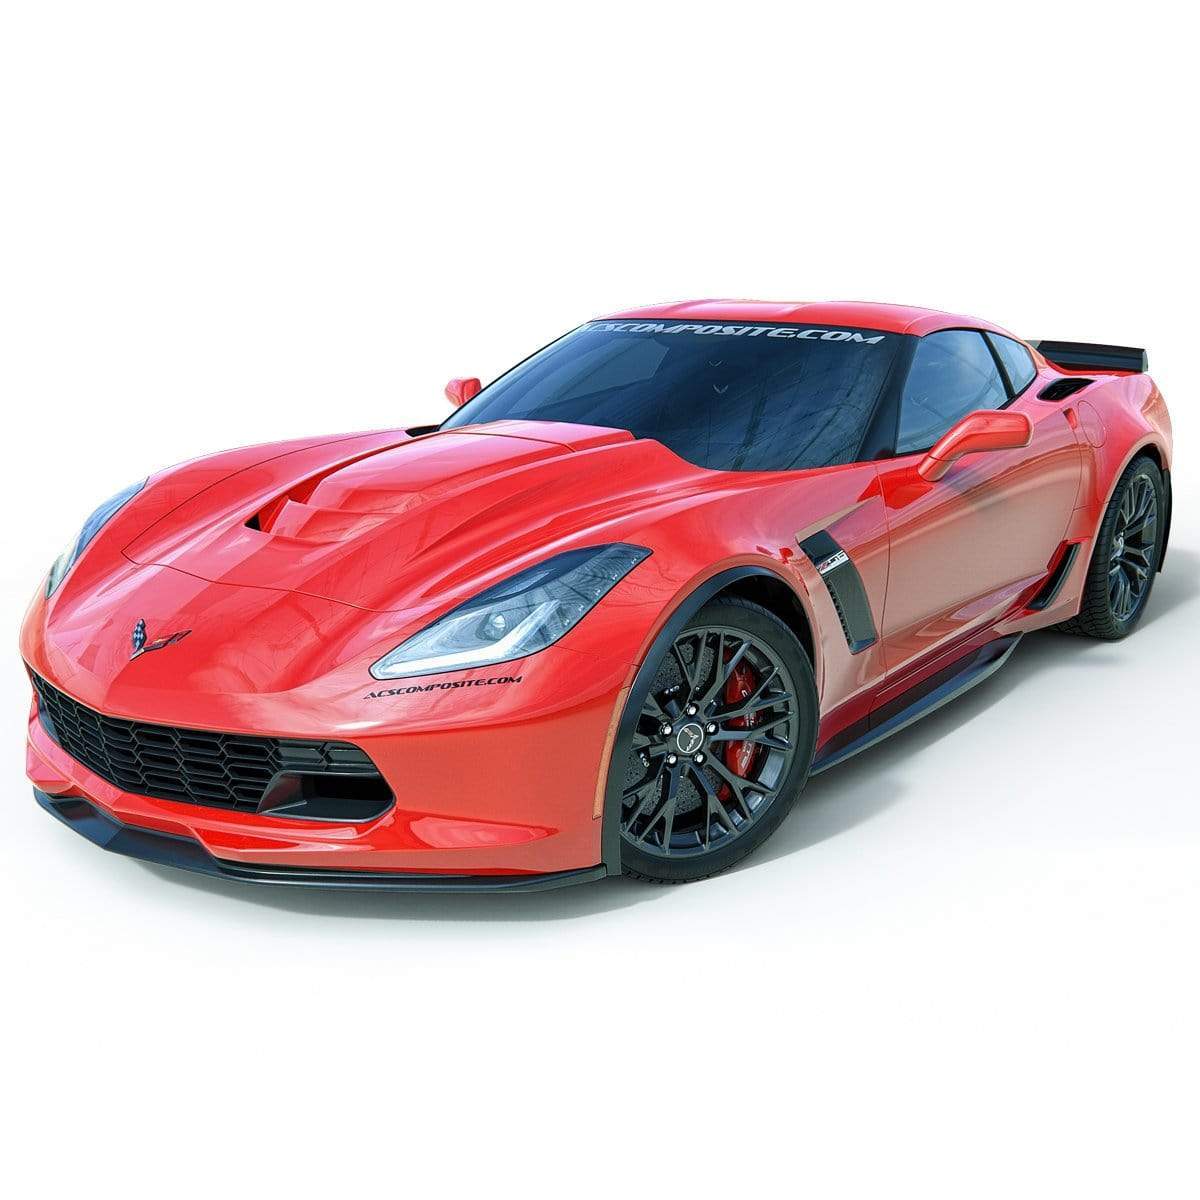 ACS Composite C7-ZR1 Hood for Chevrolet Corvette C7, SKU 45-4-203, in Fiber-Reinforced Polymer (FRP) with dual extractor system and improved cooling capacity.